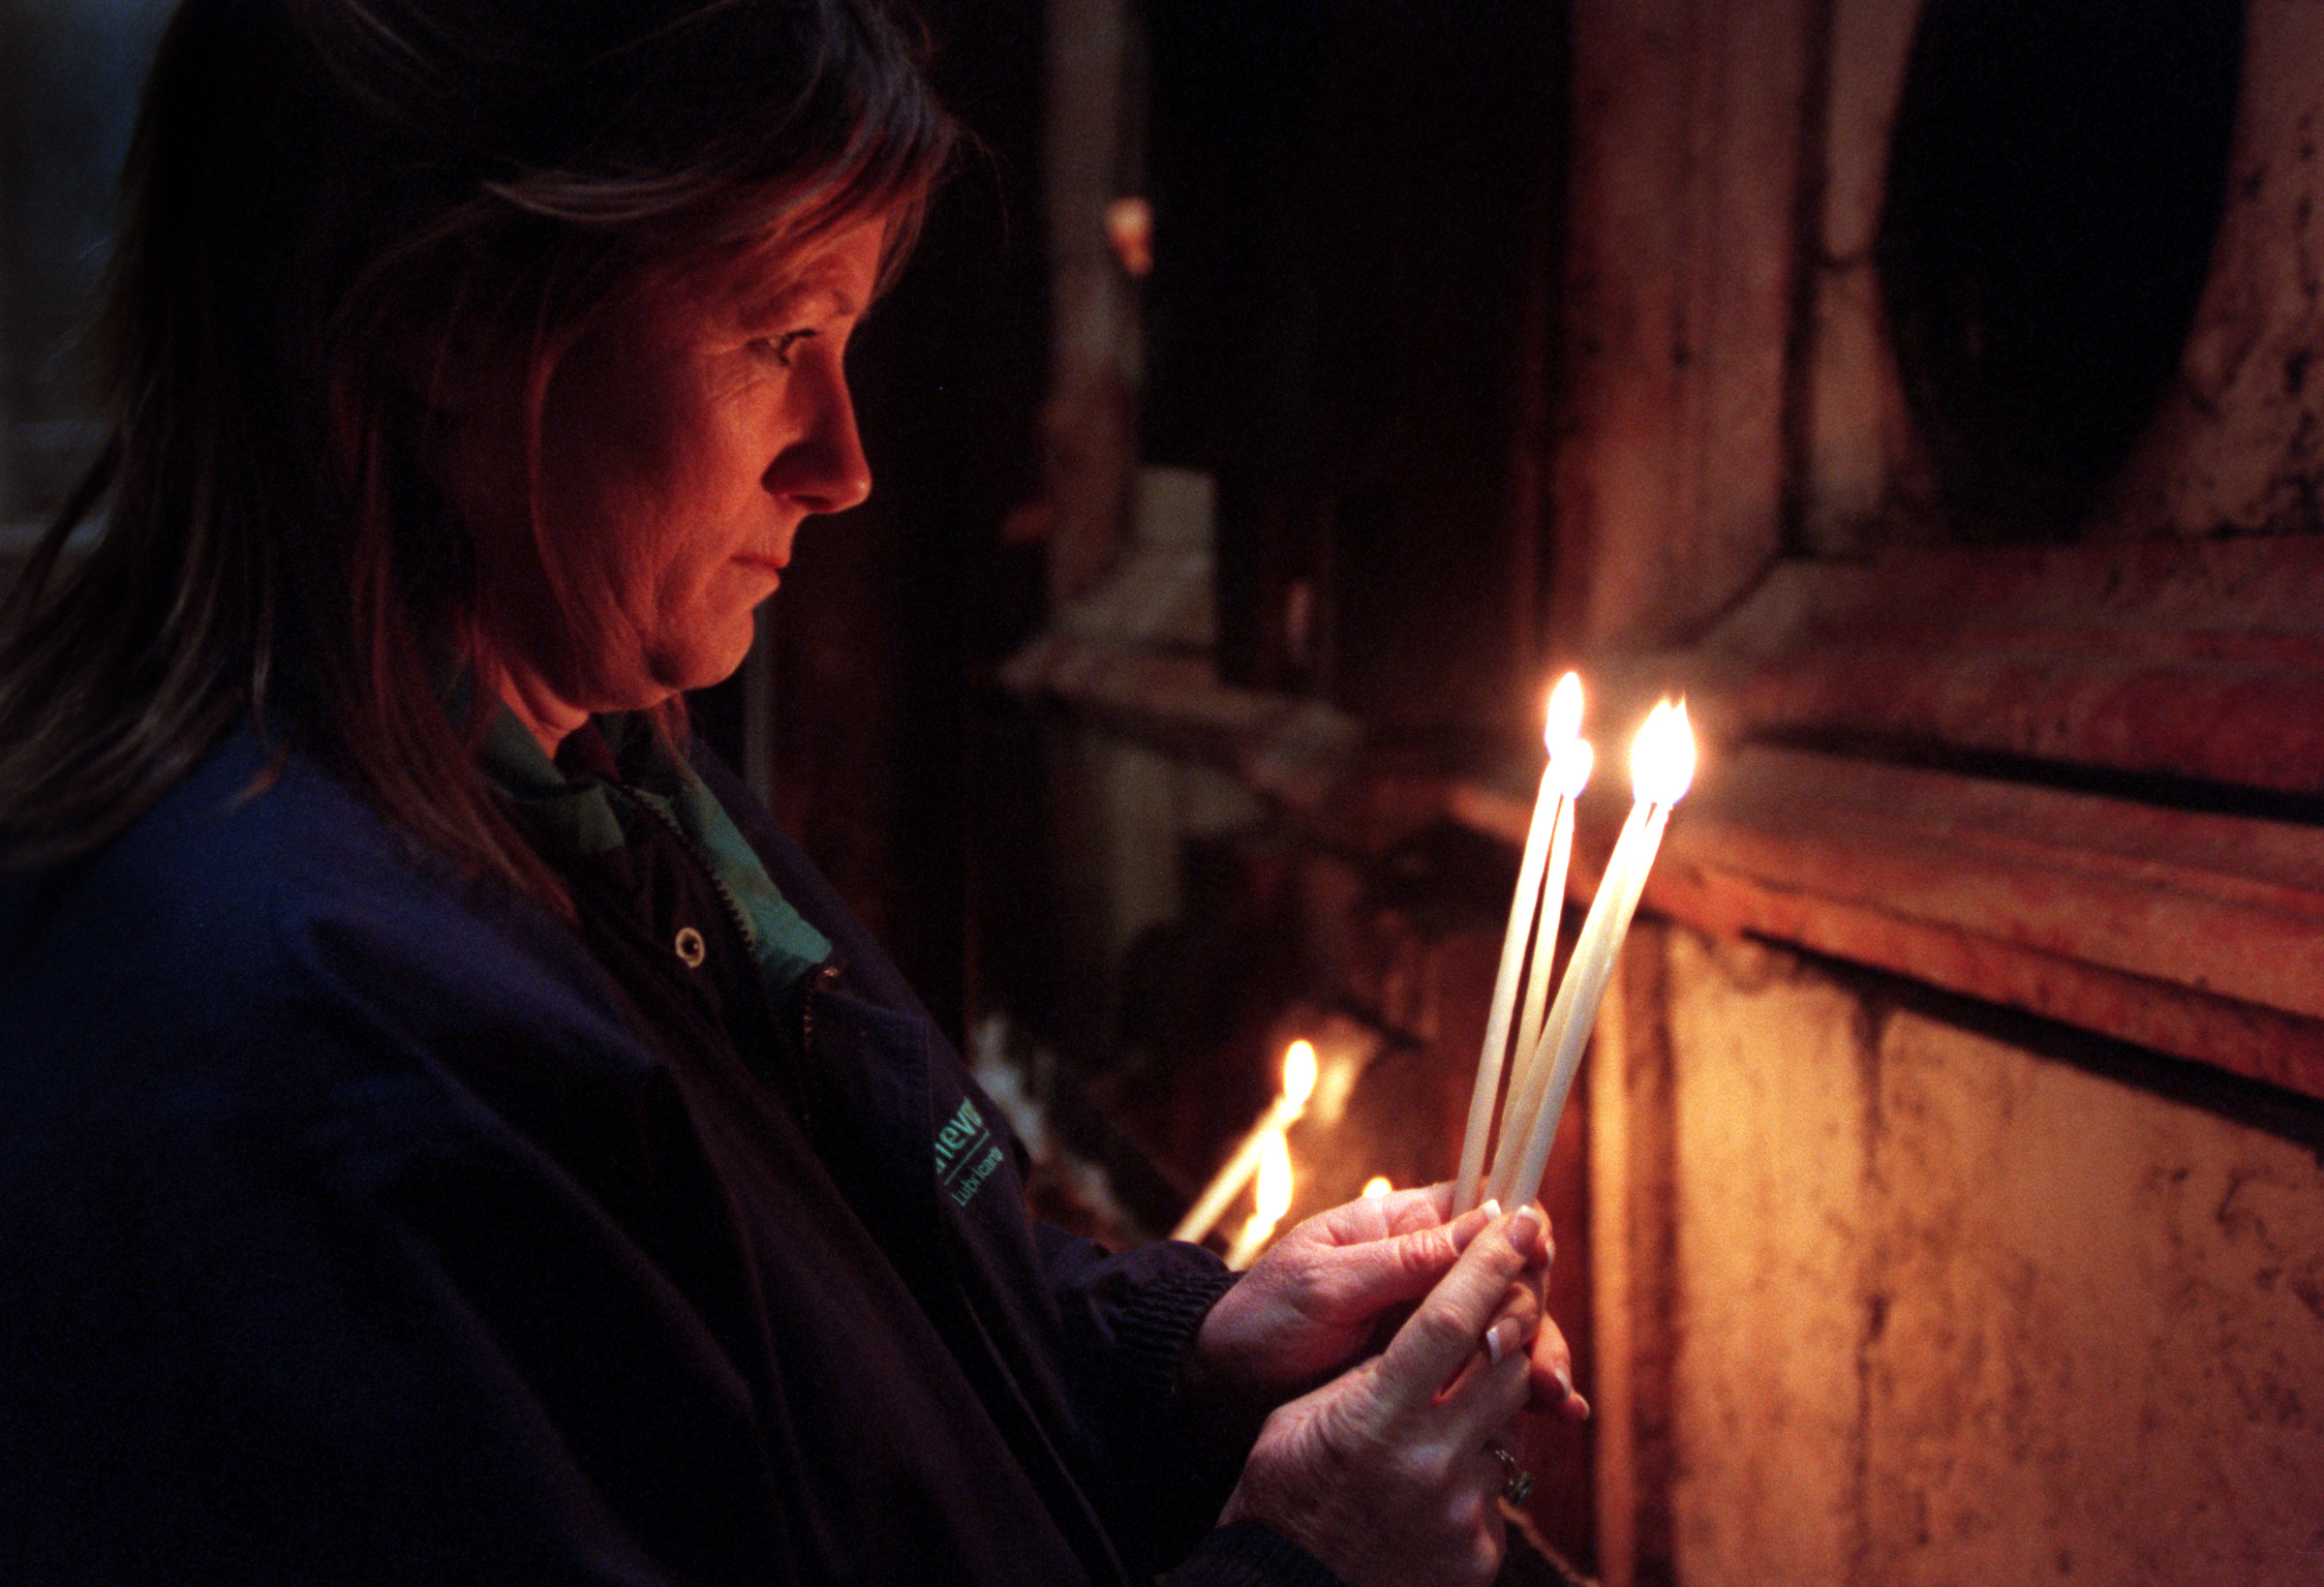  Interfaith member Melinda Griffith prays for sick family members and lights candles at Christ's tomb in the Church of the Holy Sepulcher, site of Christ's death, burial and resurrection, in the Old City of Jerusalem.&nbsp;©Gail Fisher Los Angeles Ti